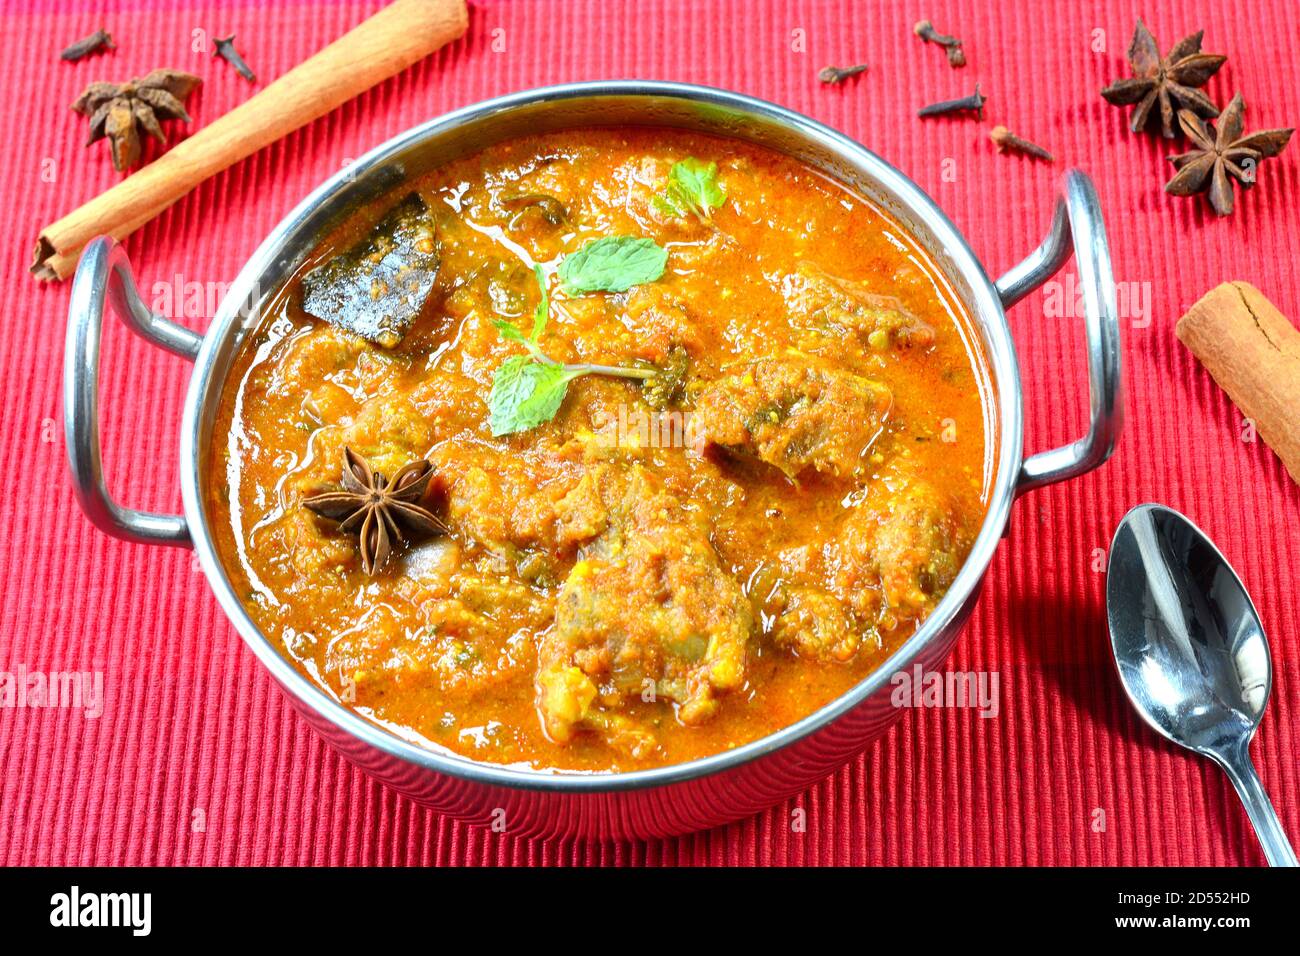 Rogan josh is famous Indian mutton goat curry dish Stock Photo